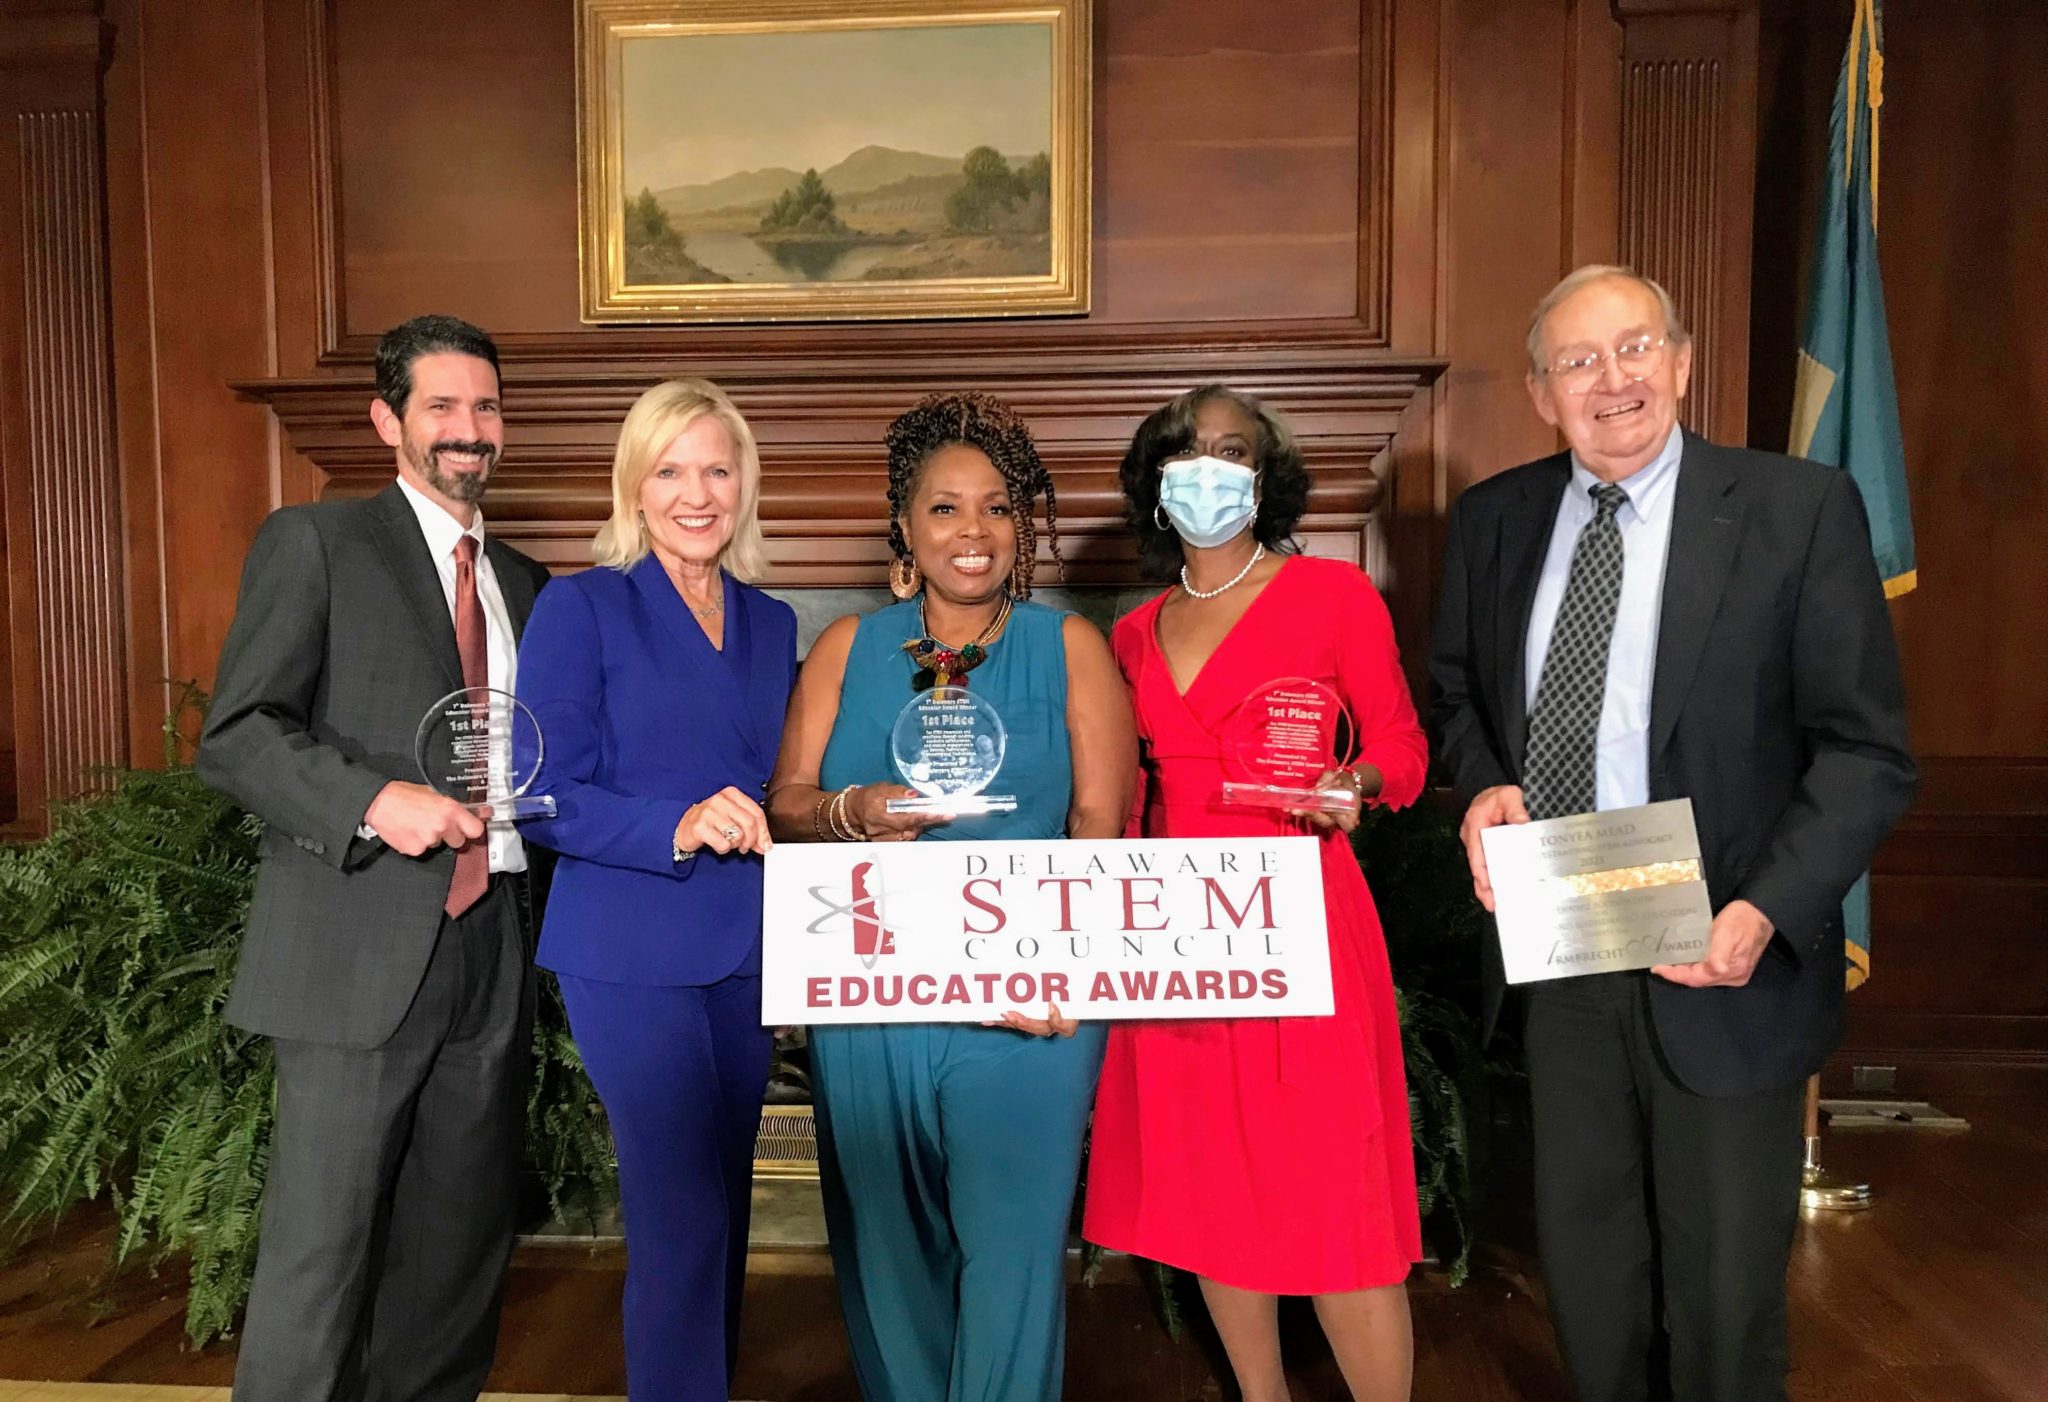 The Seventh Delaware STEM Educator Awards Recognizing Exceptional